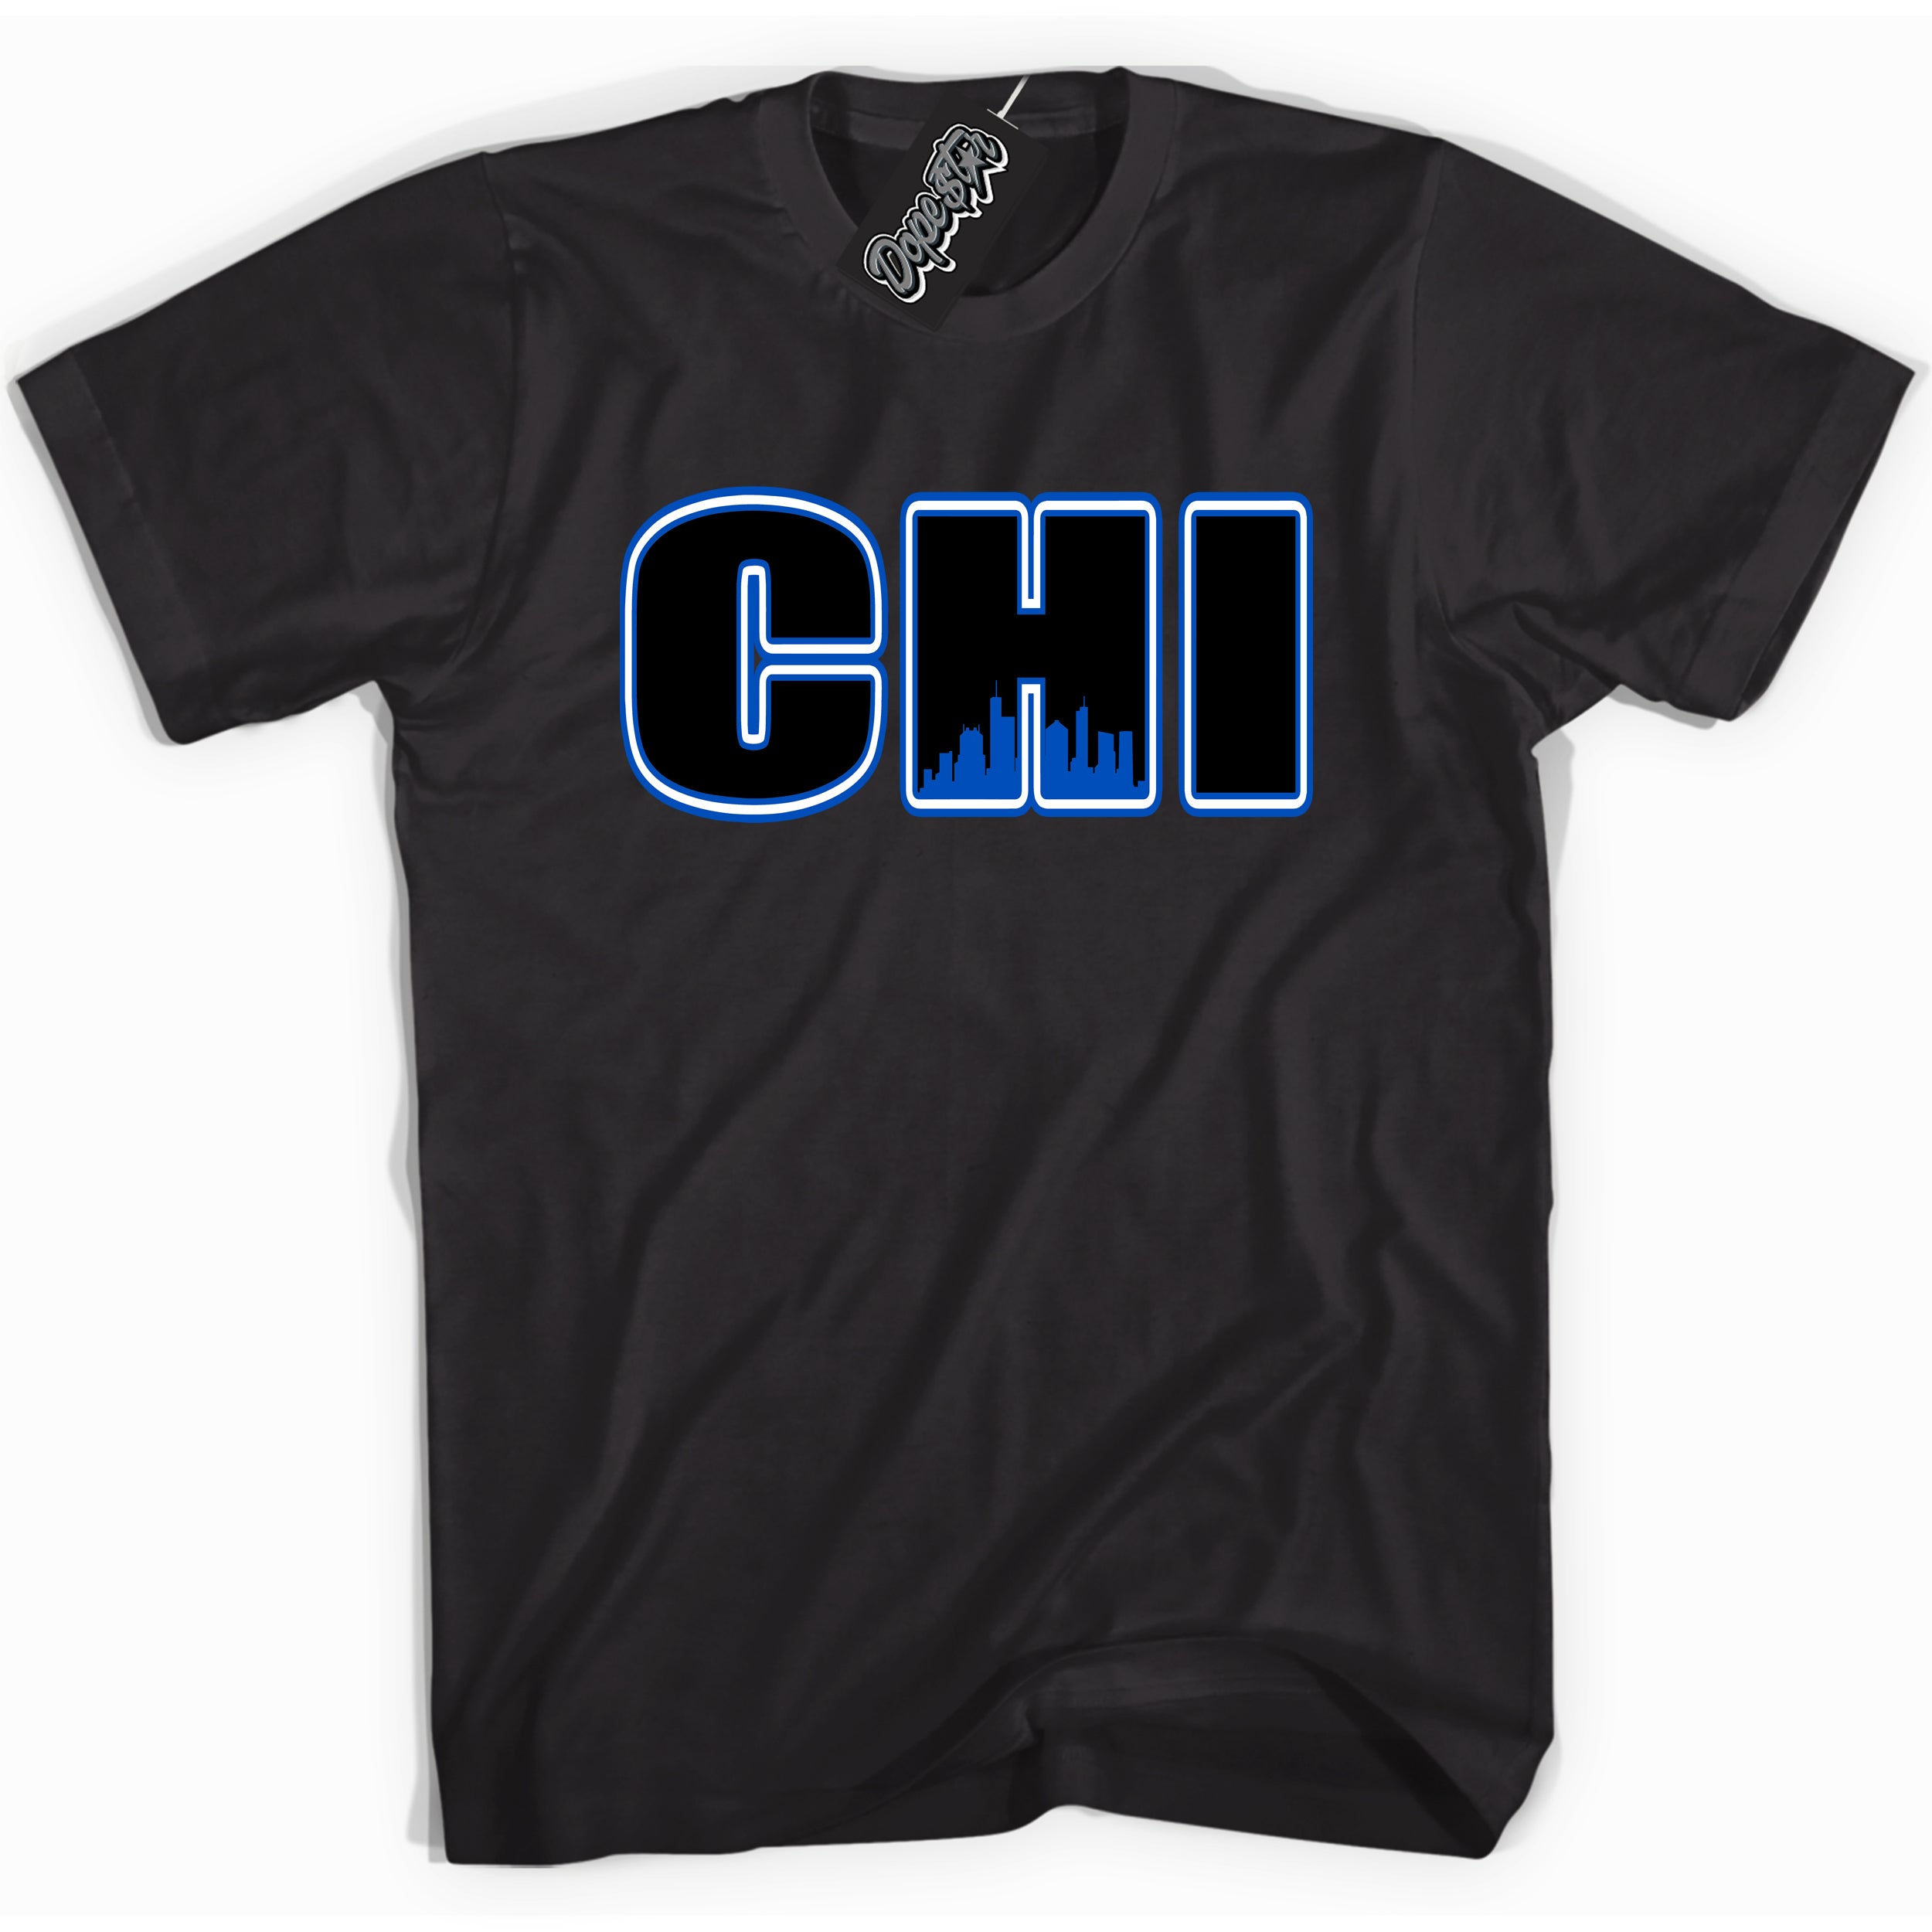 Cool Black graphic tee with "Chicago" design, that perfectly matches Royal Reimagined 1s sneakers 